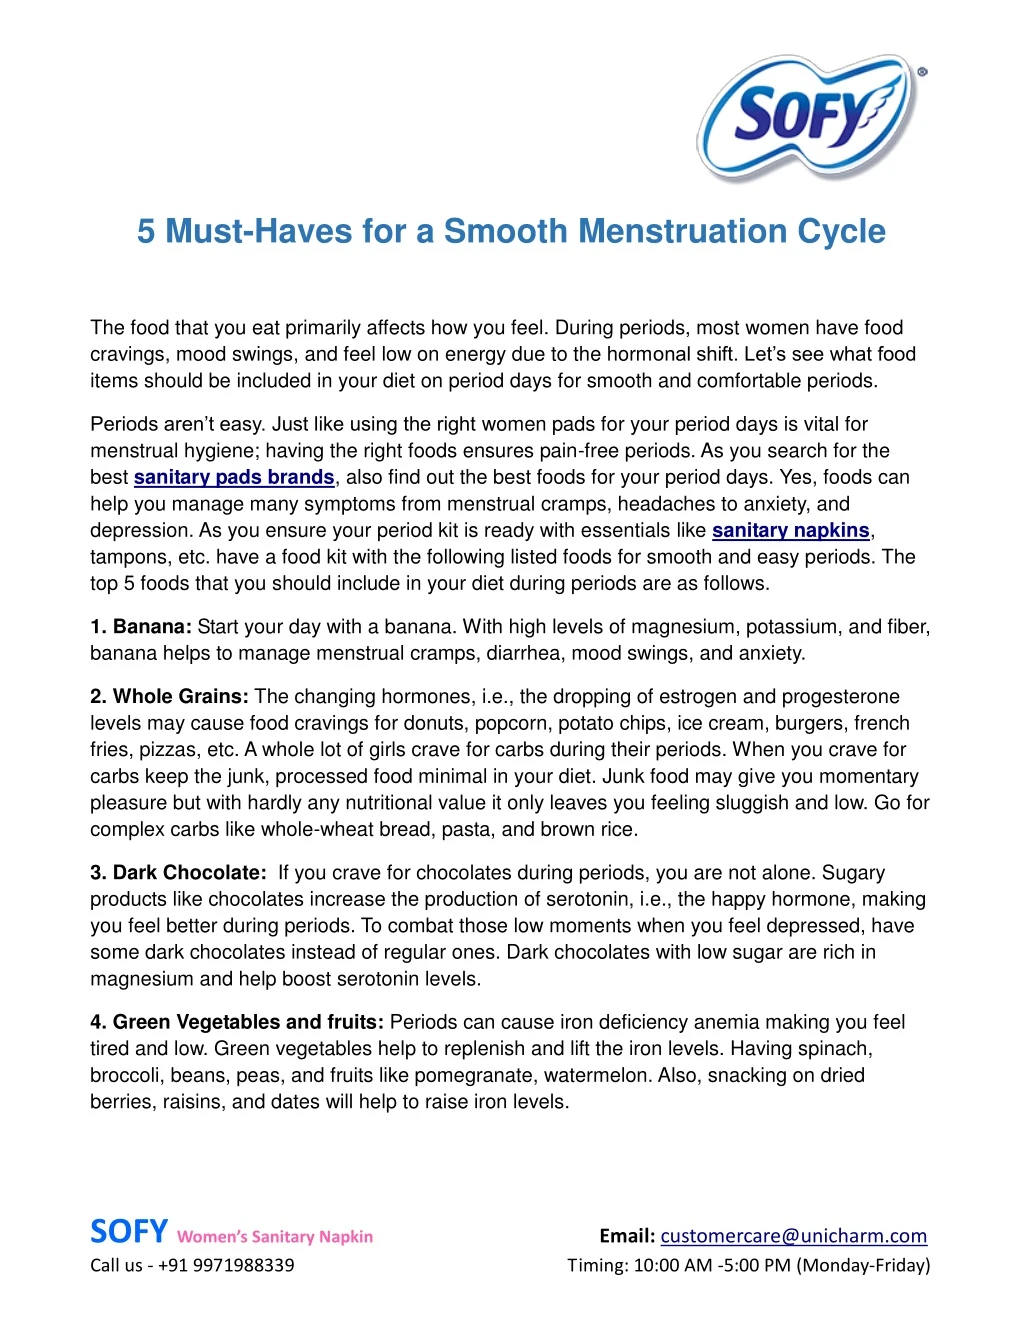 5 must haves for a smooth menstruation cycle